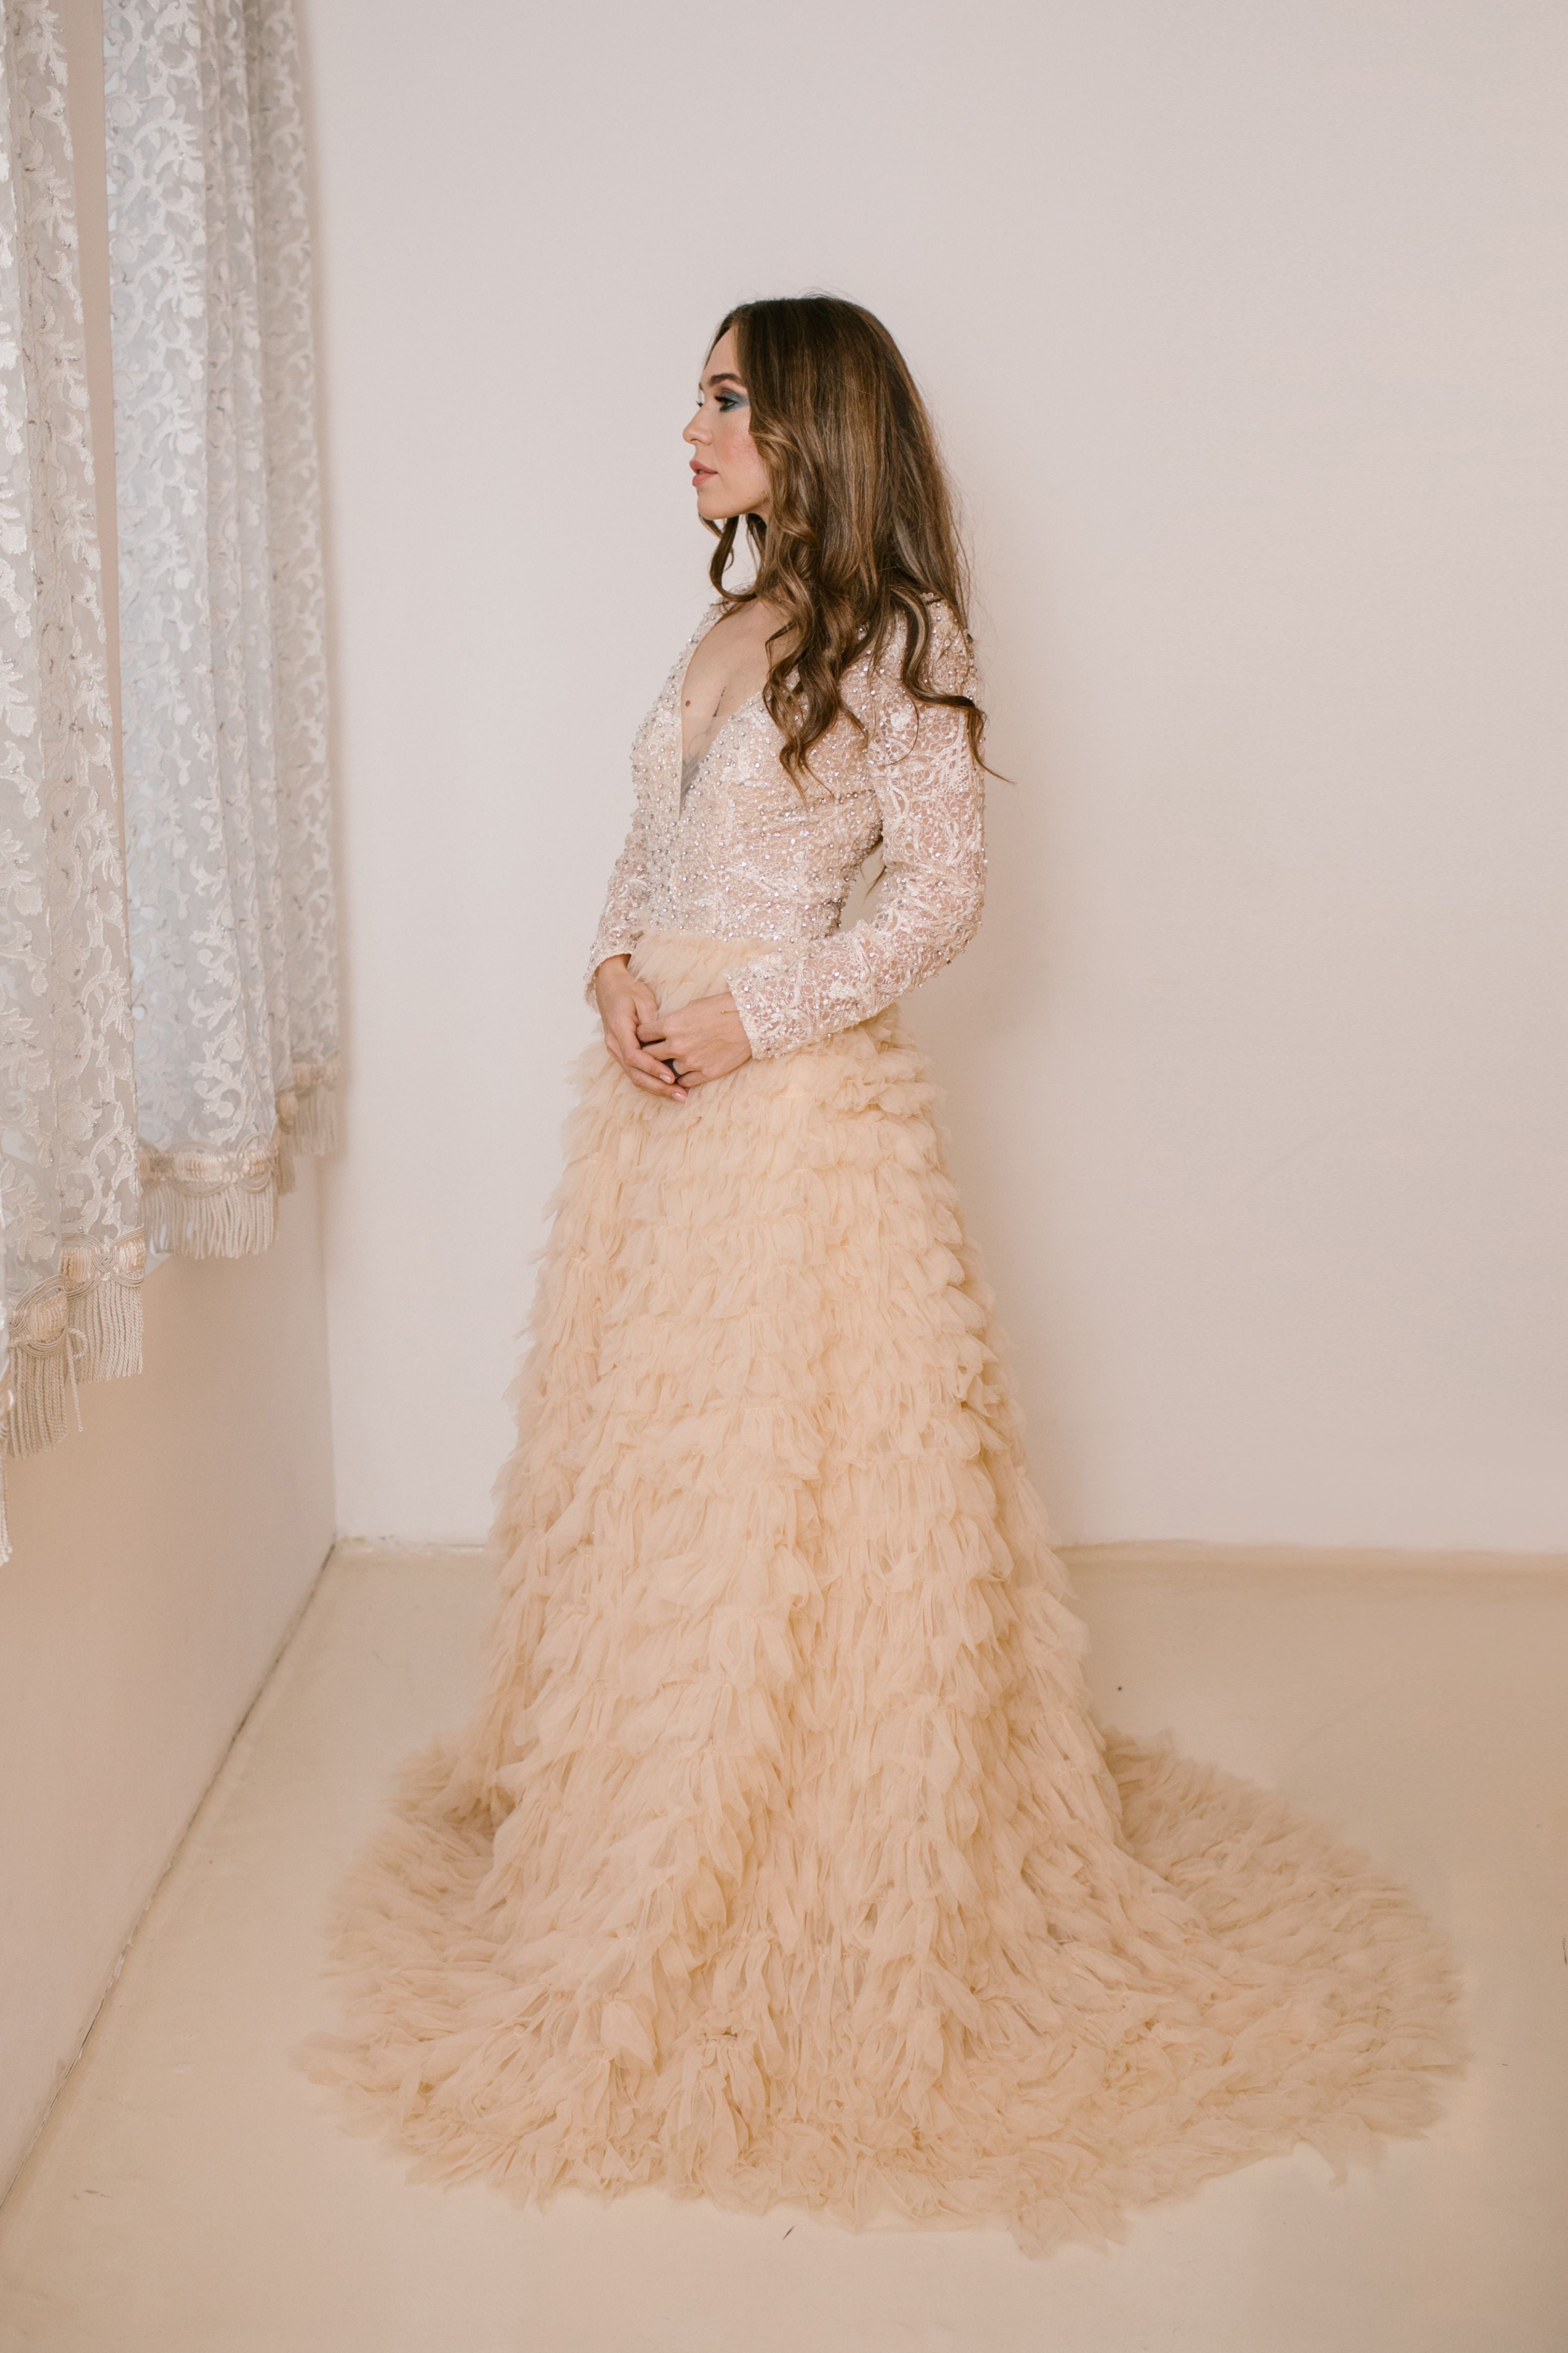 Tulle Gown with Ruffles in Beige